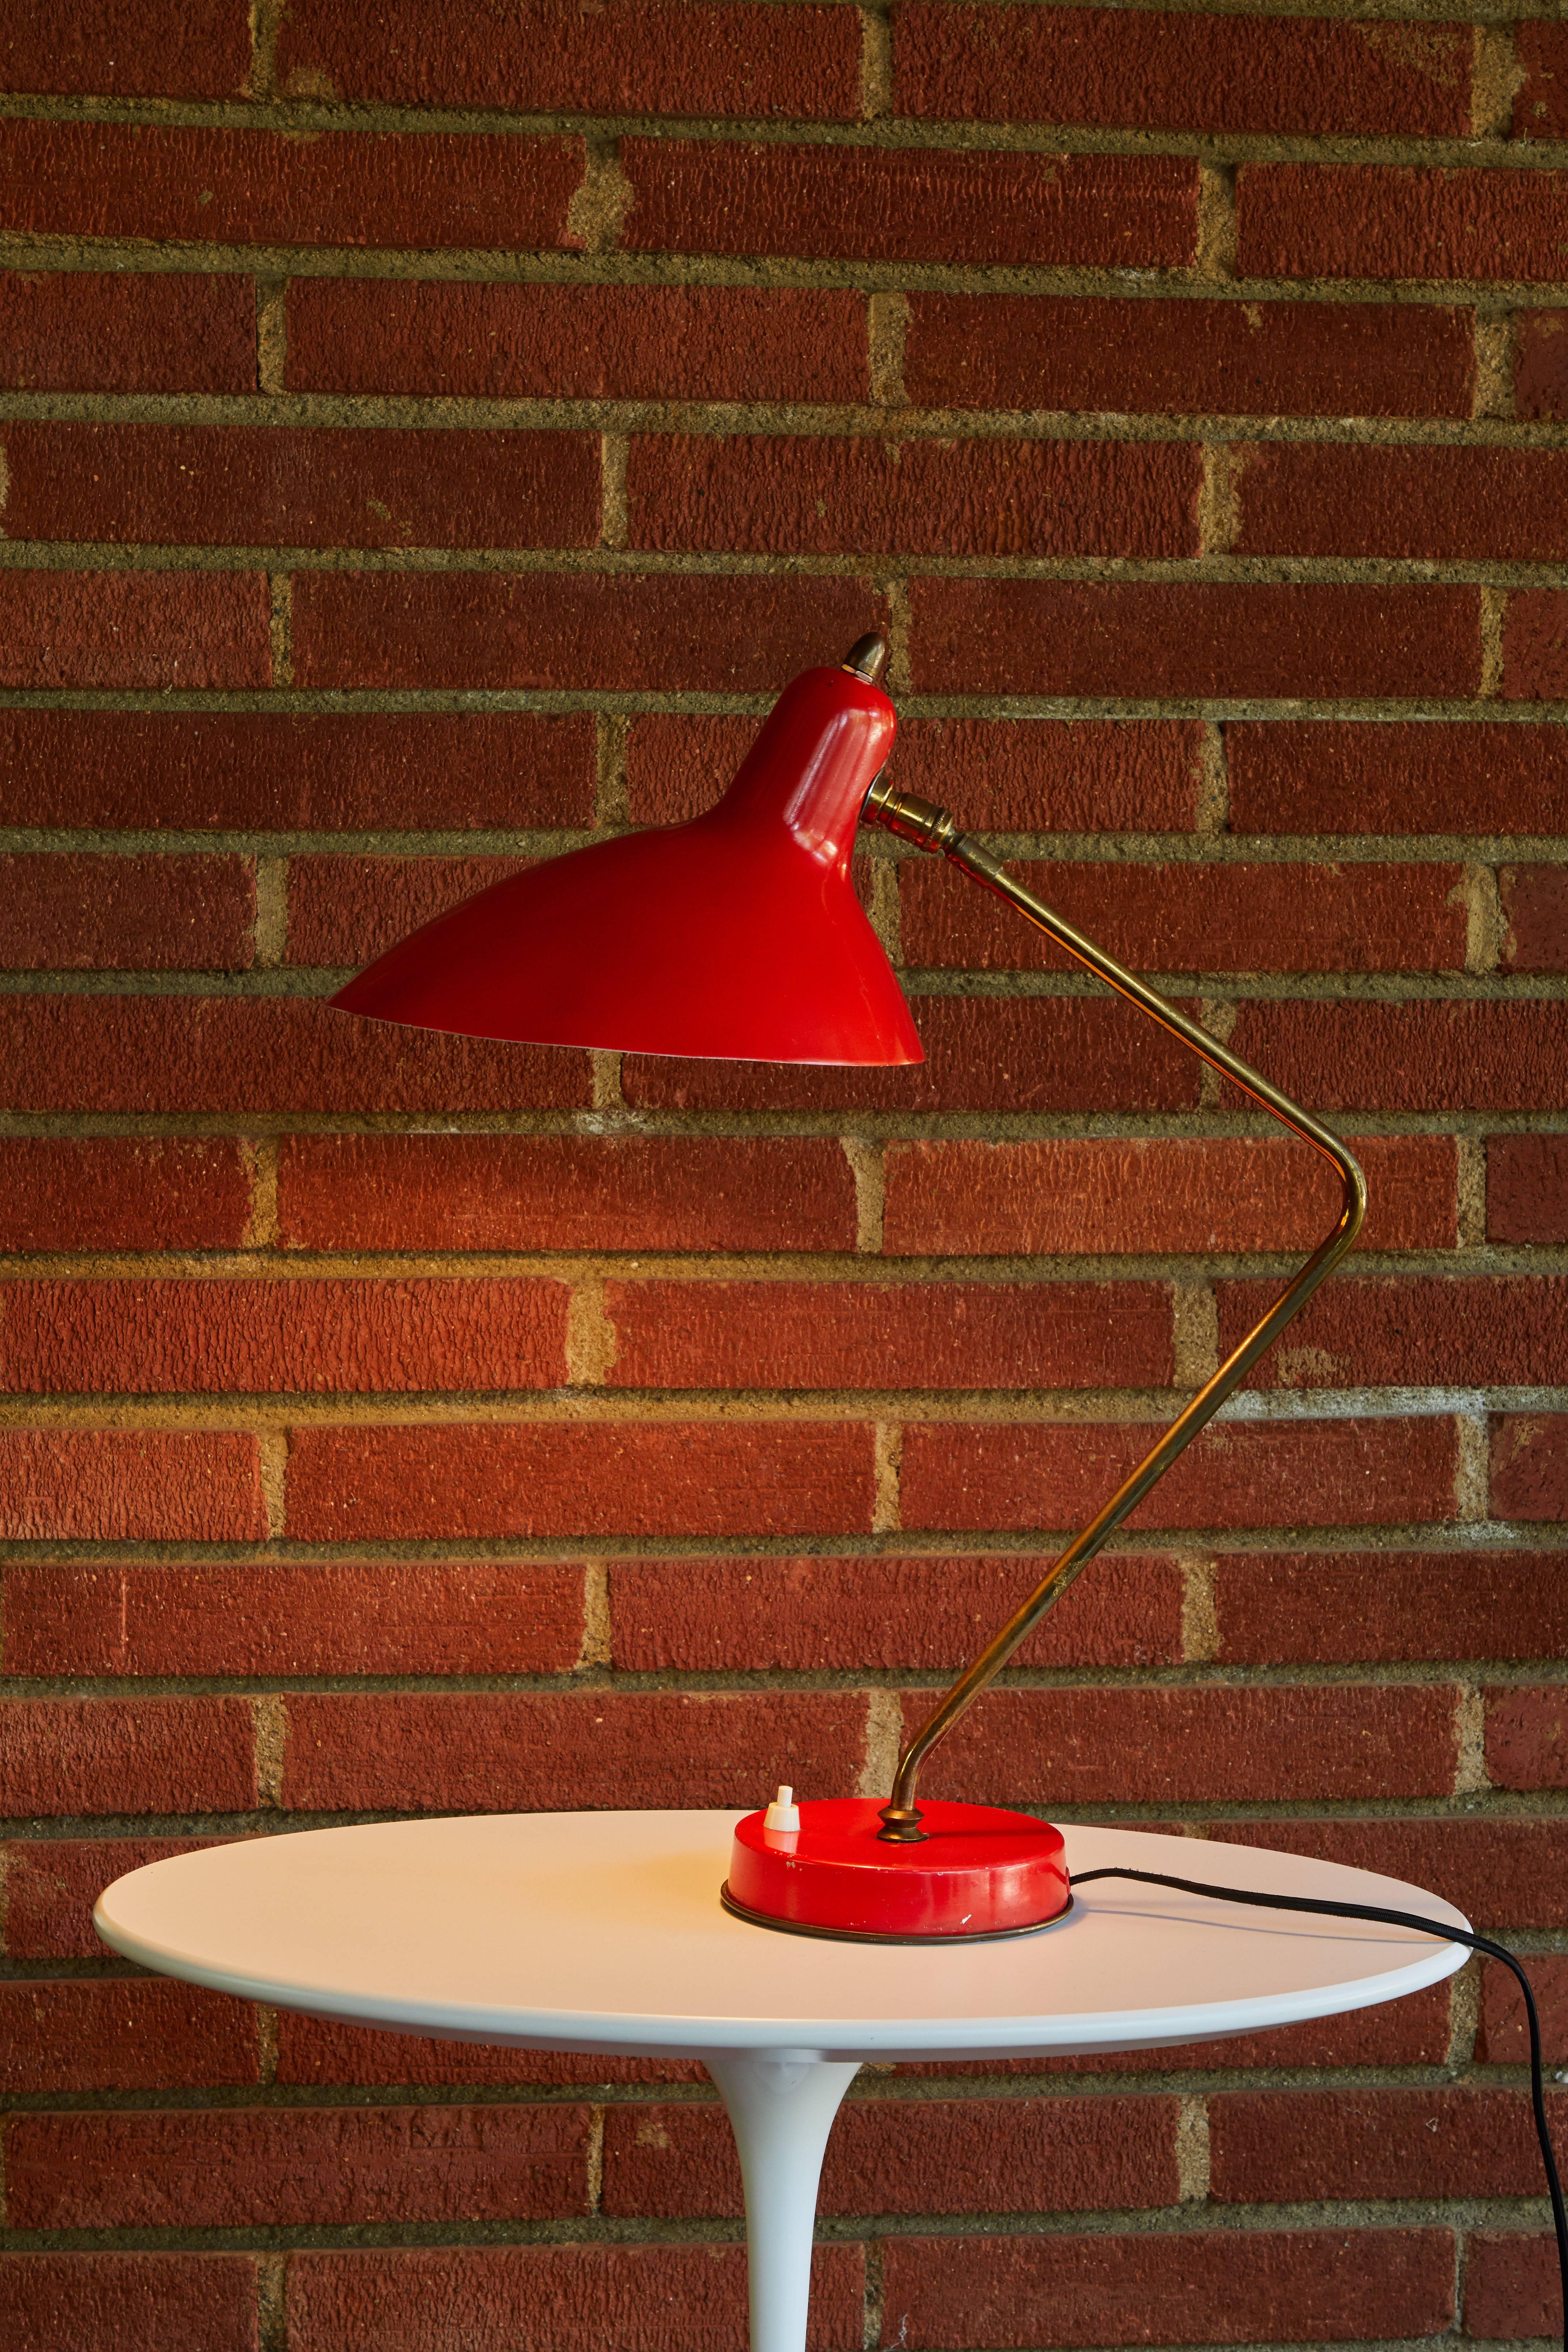 1950s Boris Lacroix table lamp. This rare and elegant table lamp is executed in red metal and brass, France, circa 1950s. A celebrated Art Deco lighting designer who successfully made the transition to Mid-Century Modern idiom, Jean Boris Lacroix's